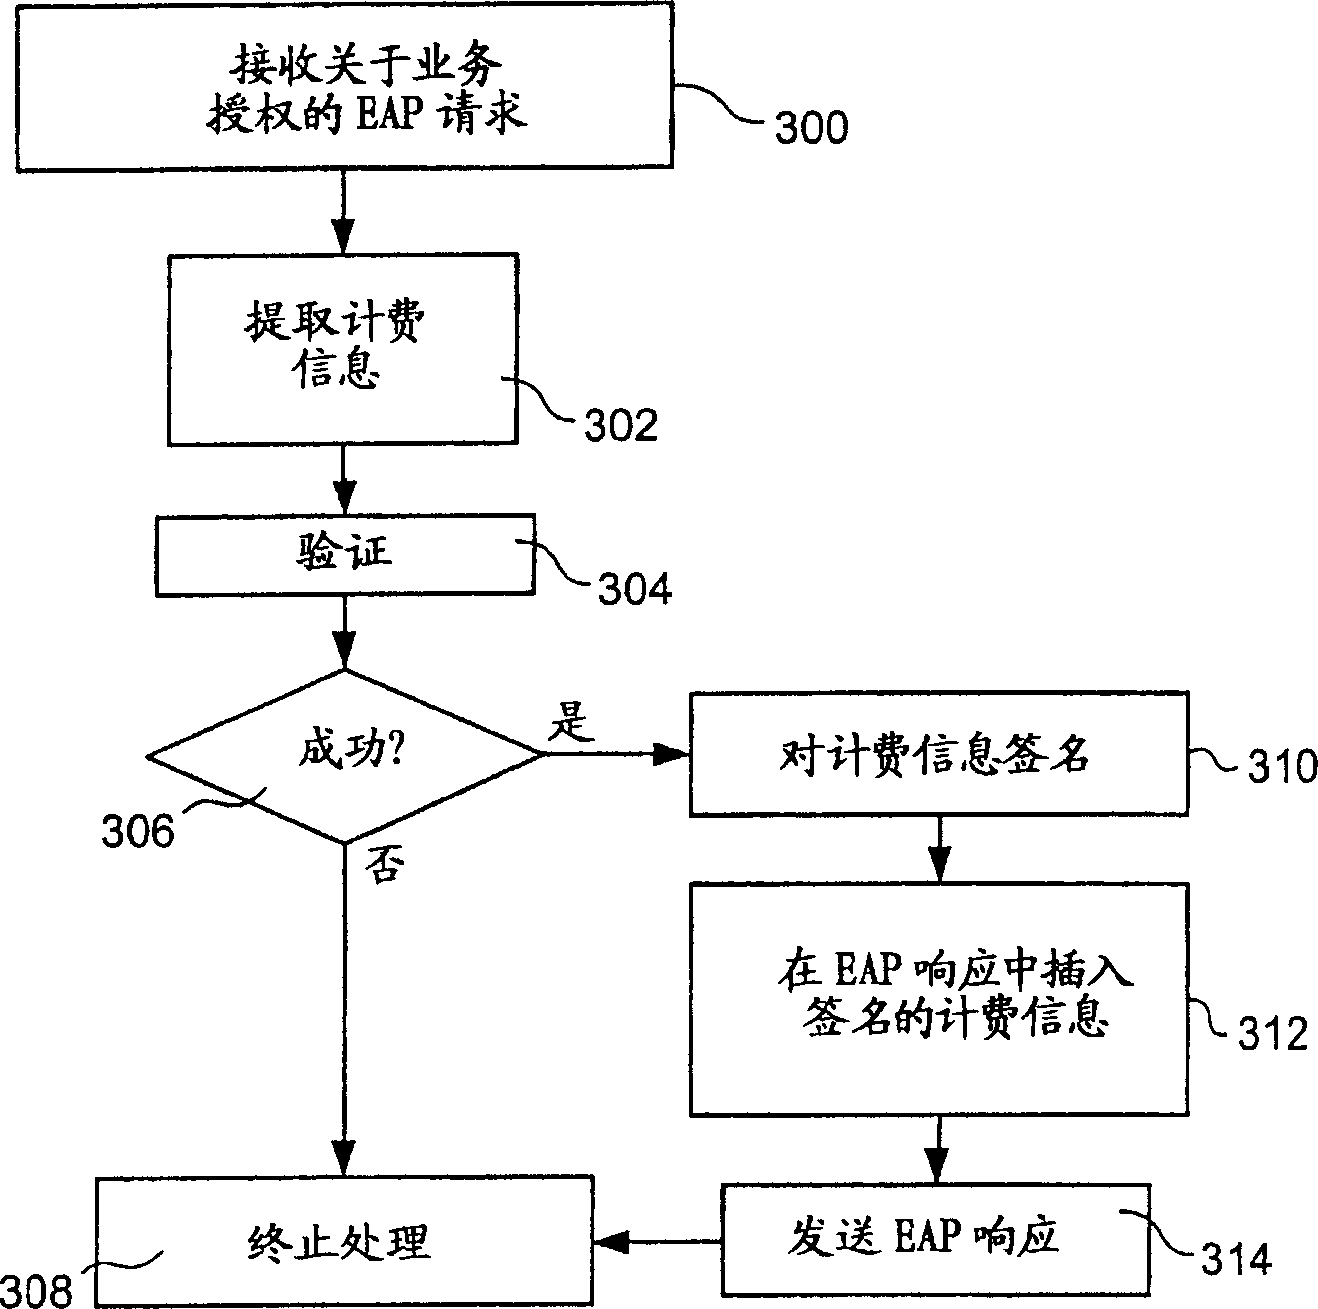 Method system and device for transferring accounting information